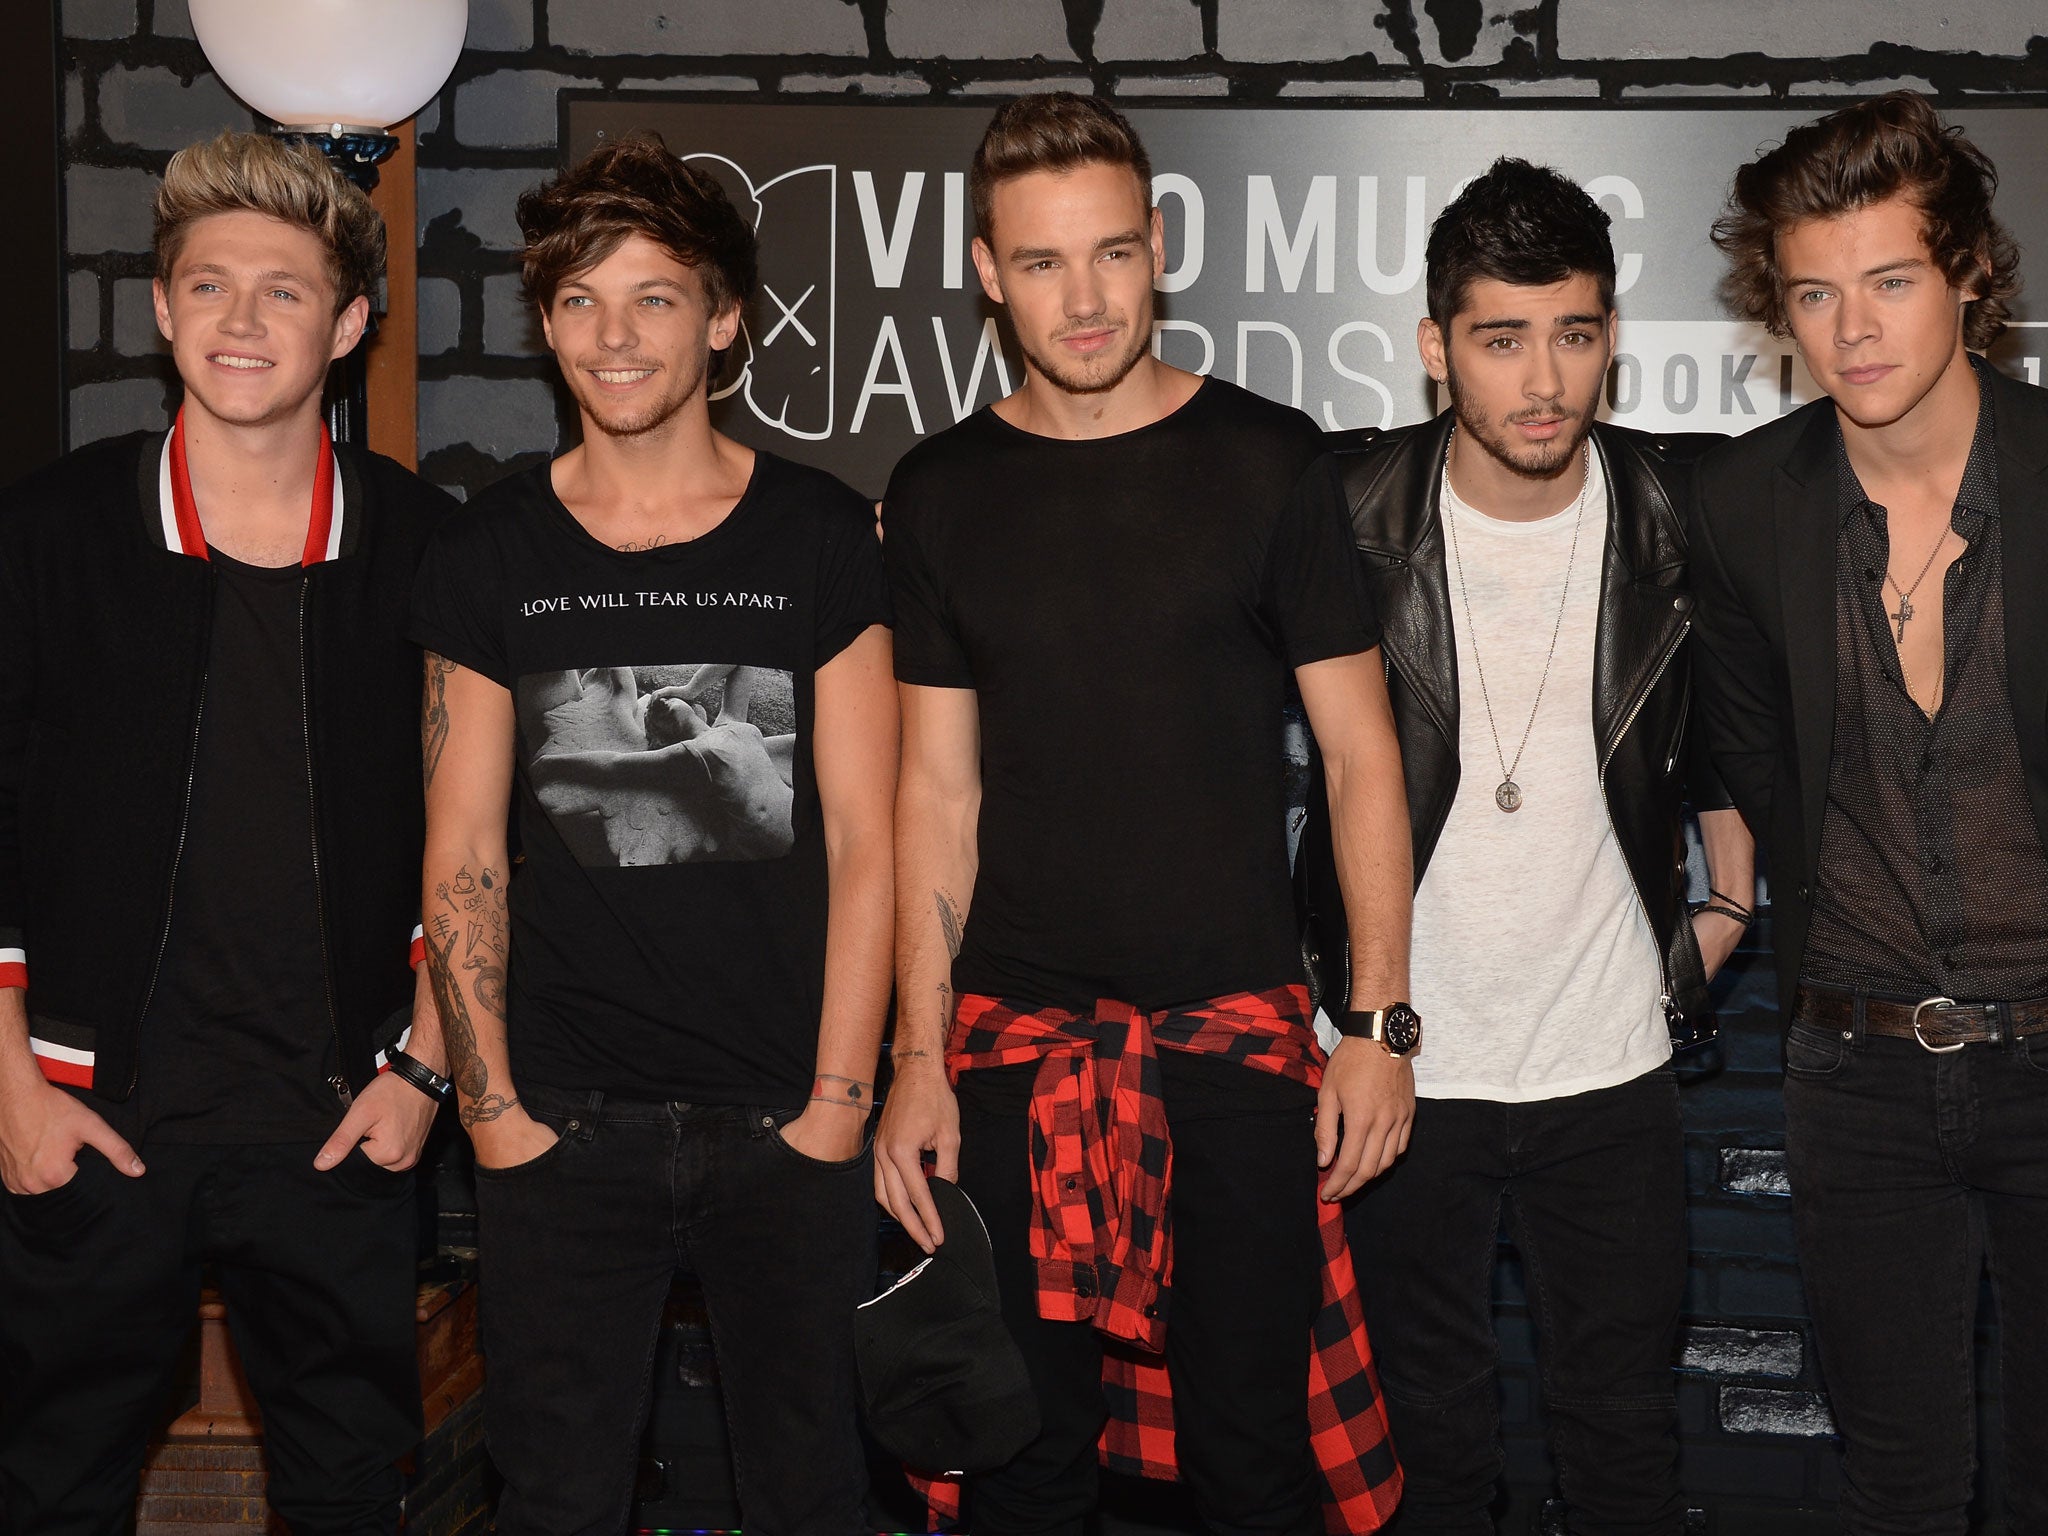 Boy band One Direction have their Twittersphere in the palm of their hands